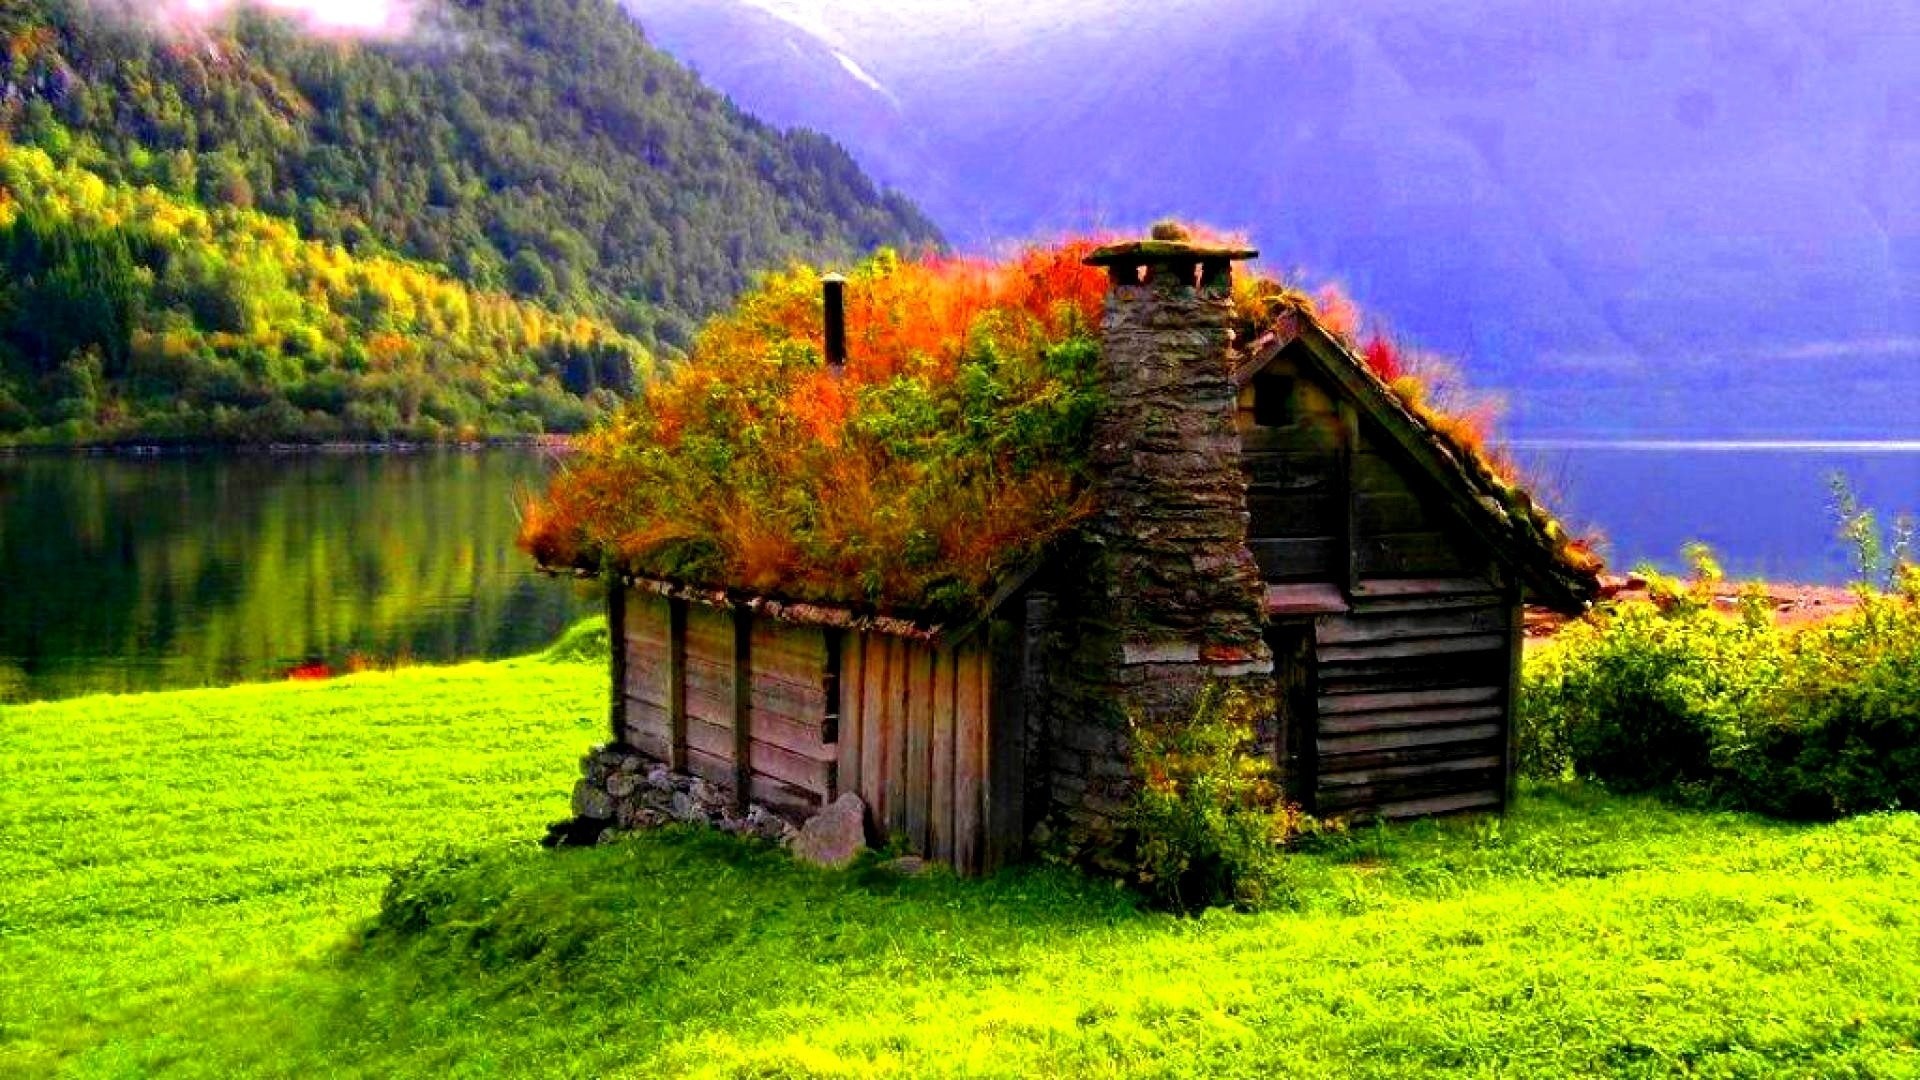 1920x1080 Norway Wallpapers 1080p | HD Wallpapers (High Definition) | Free .